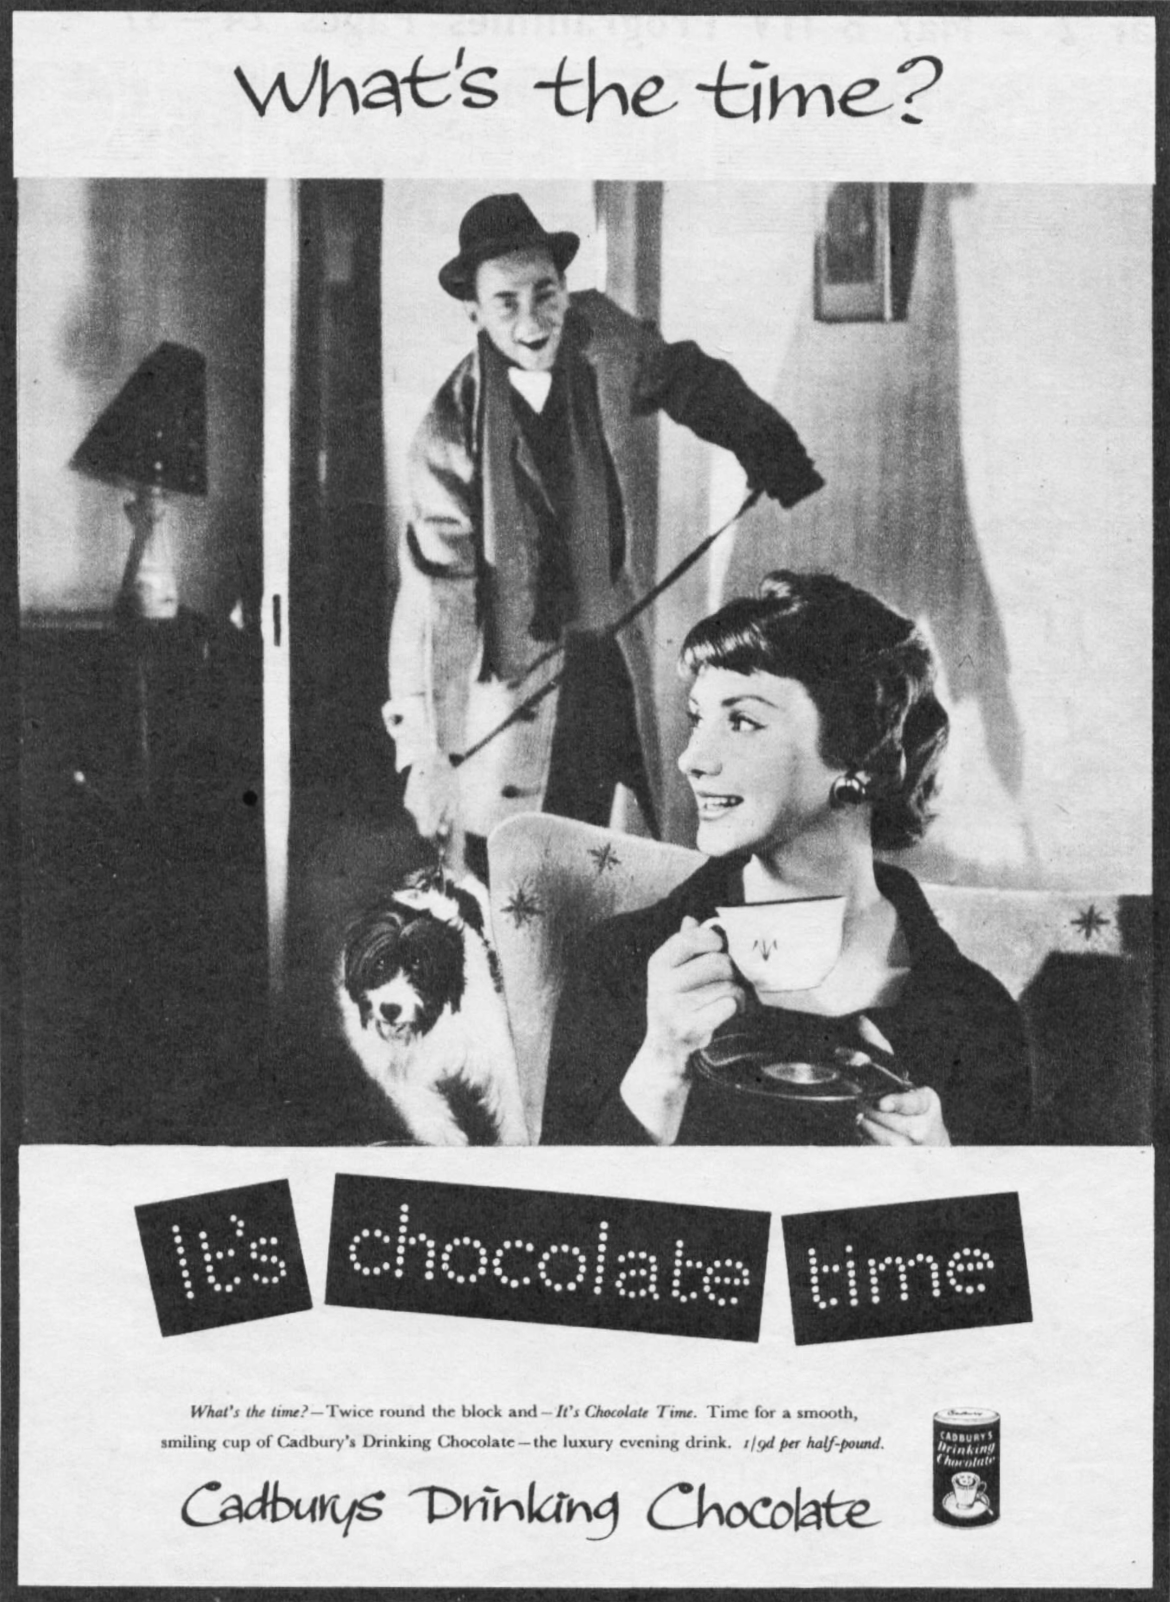 What's the time? It's chocolate time